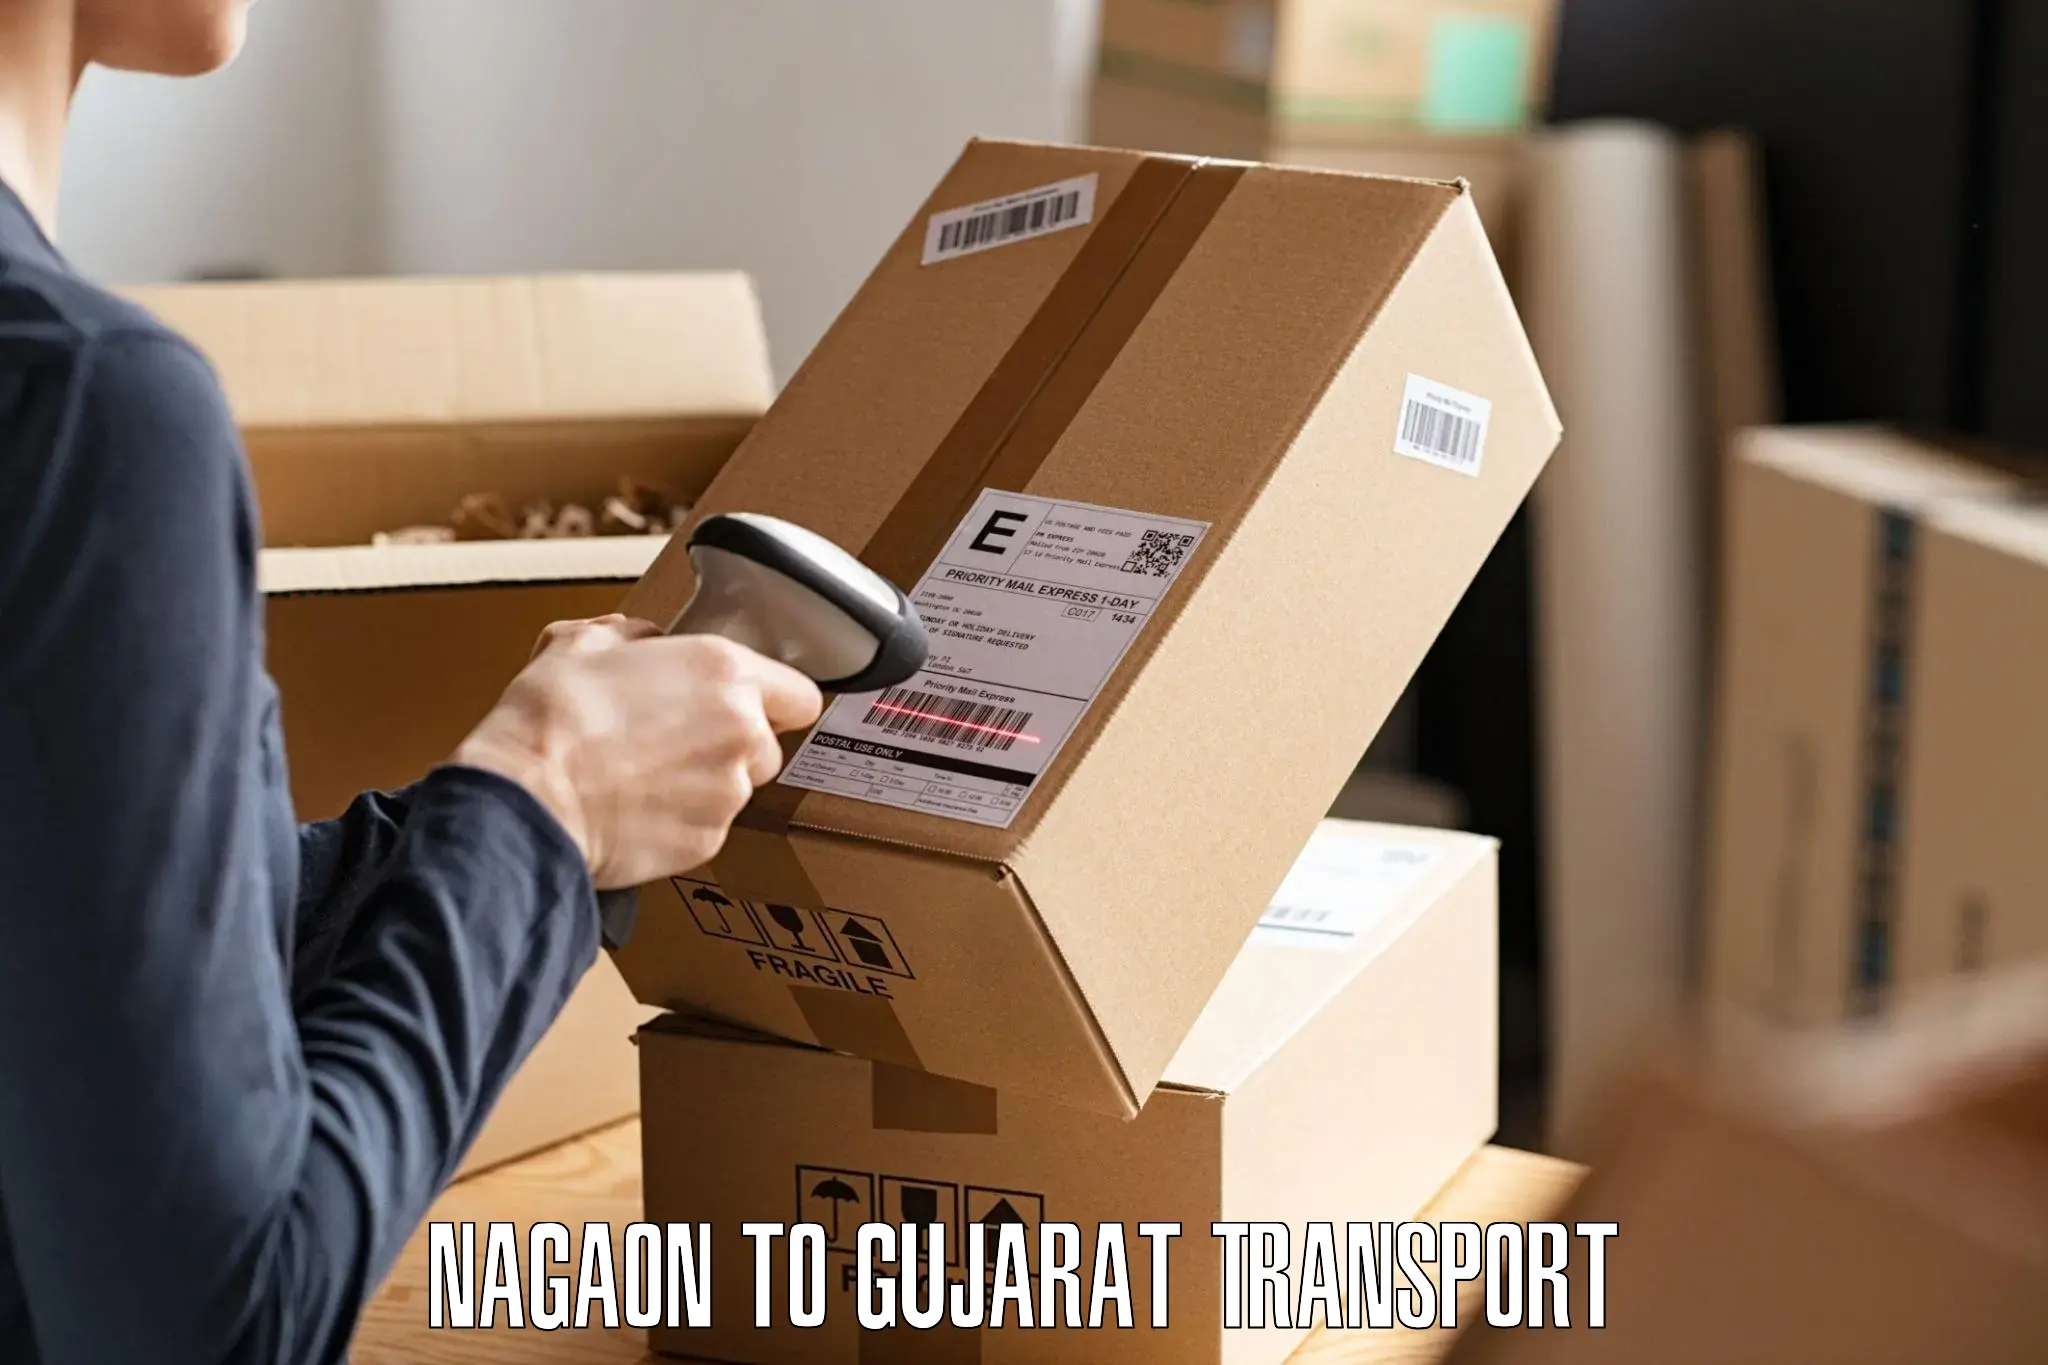 Commercial transport service Nagaon to Dharmaram